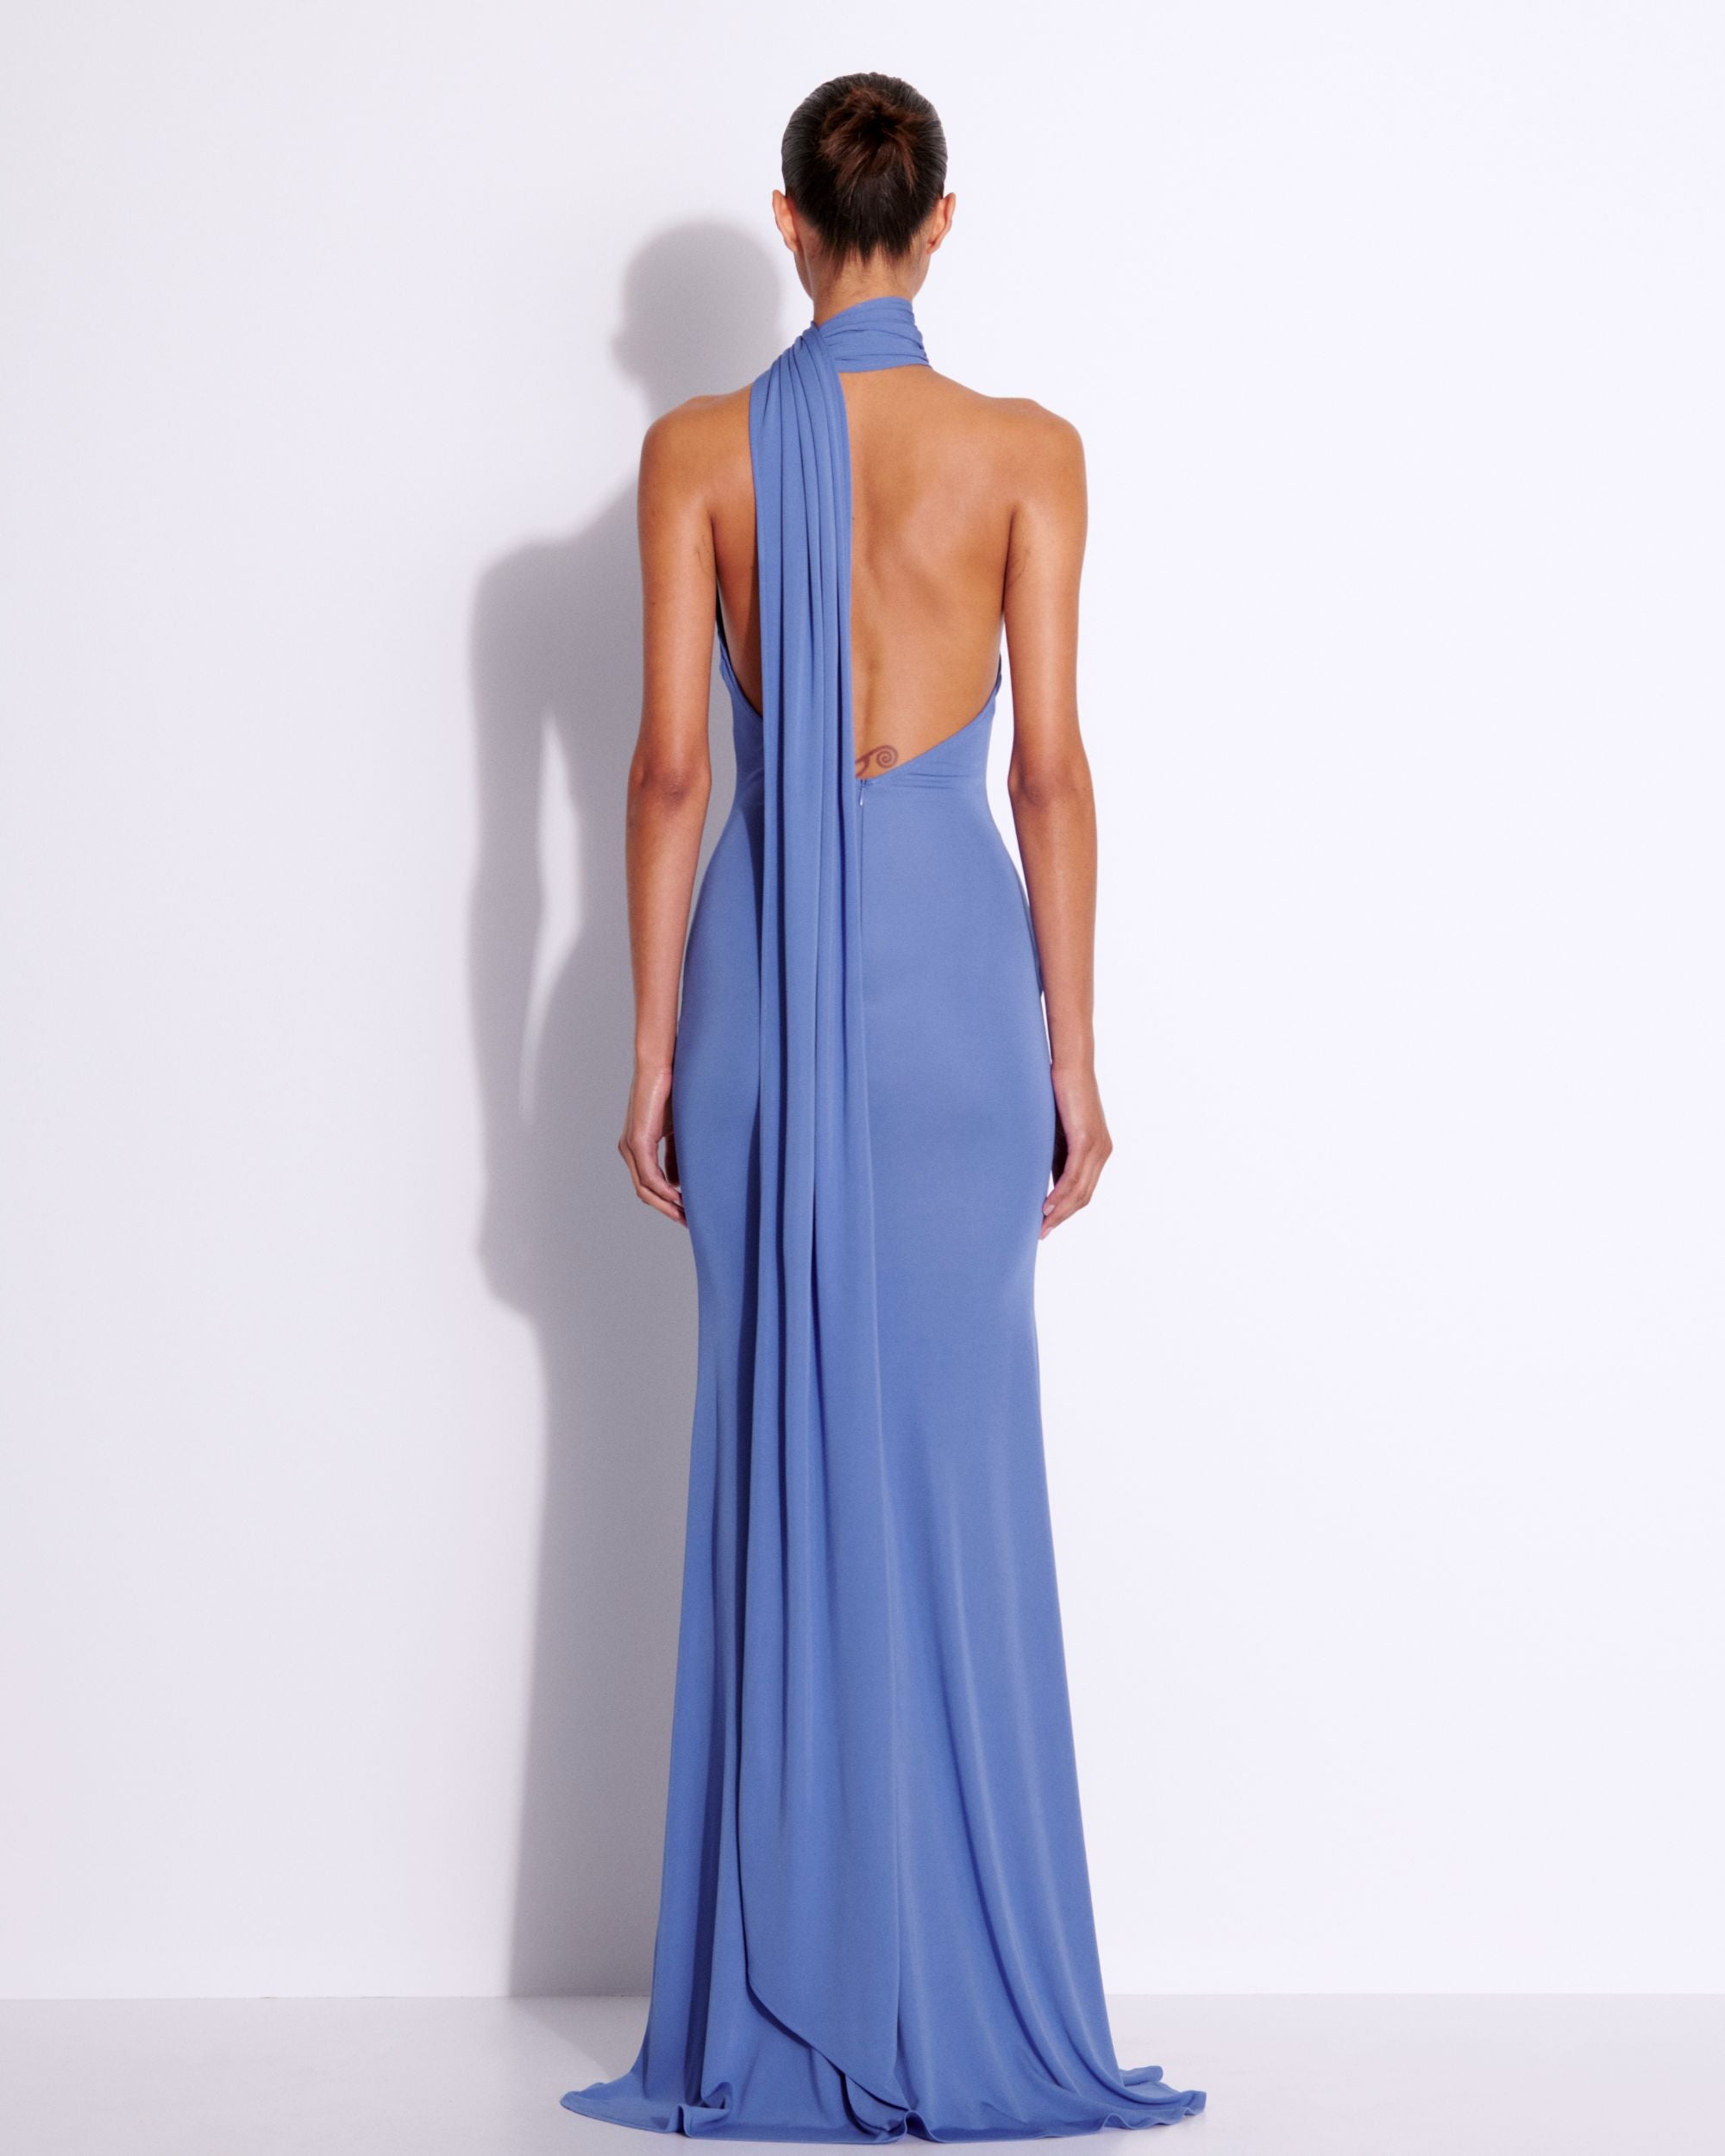 Scarf Wrap Gown in Viscose Jersey